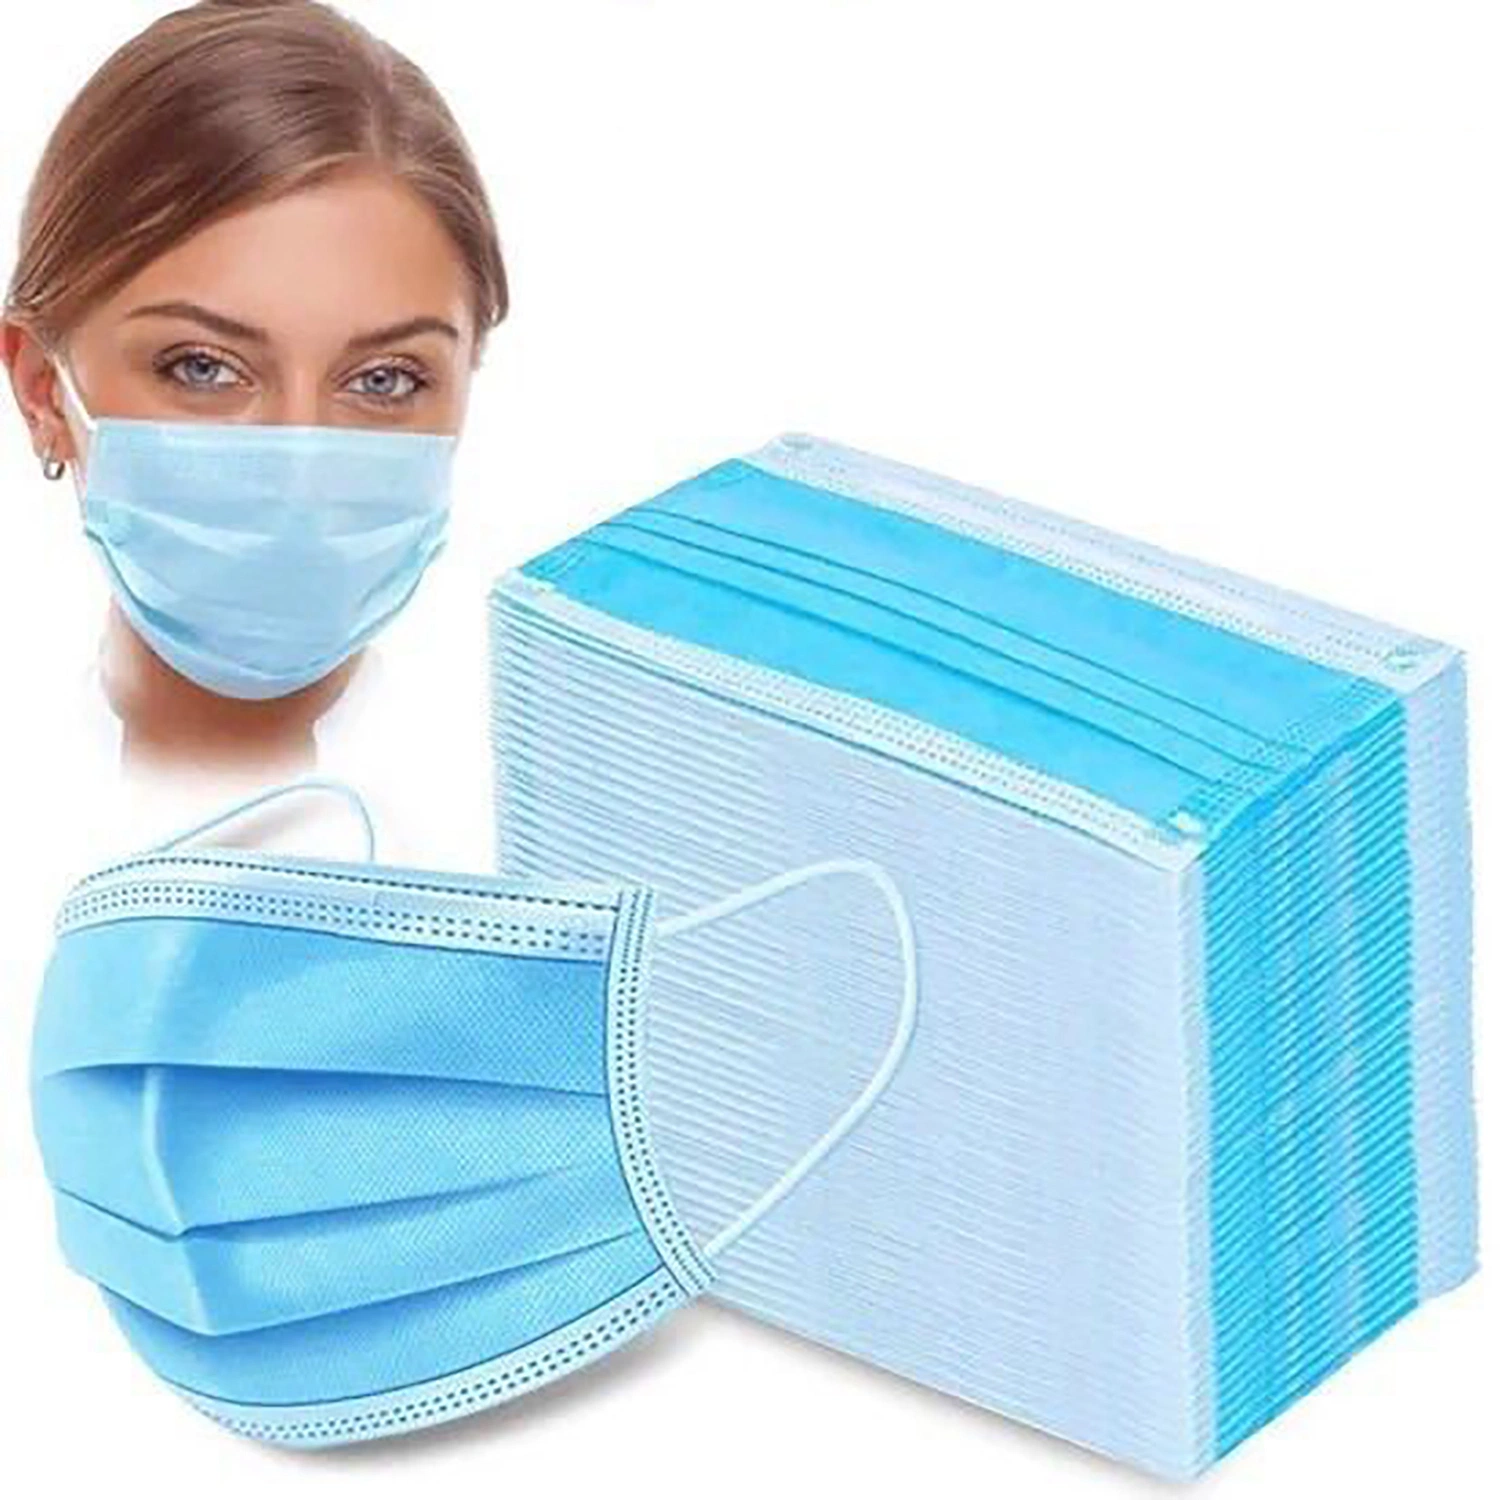 Disposable My-a+ Brand 3 Ply Face Mask Respirator From Direct Factory